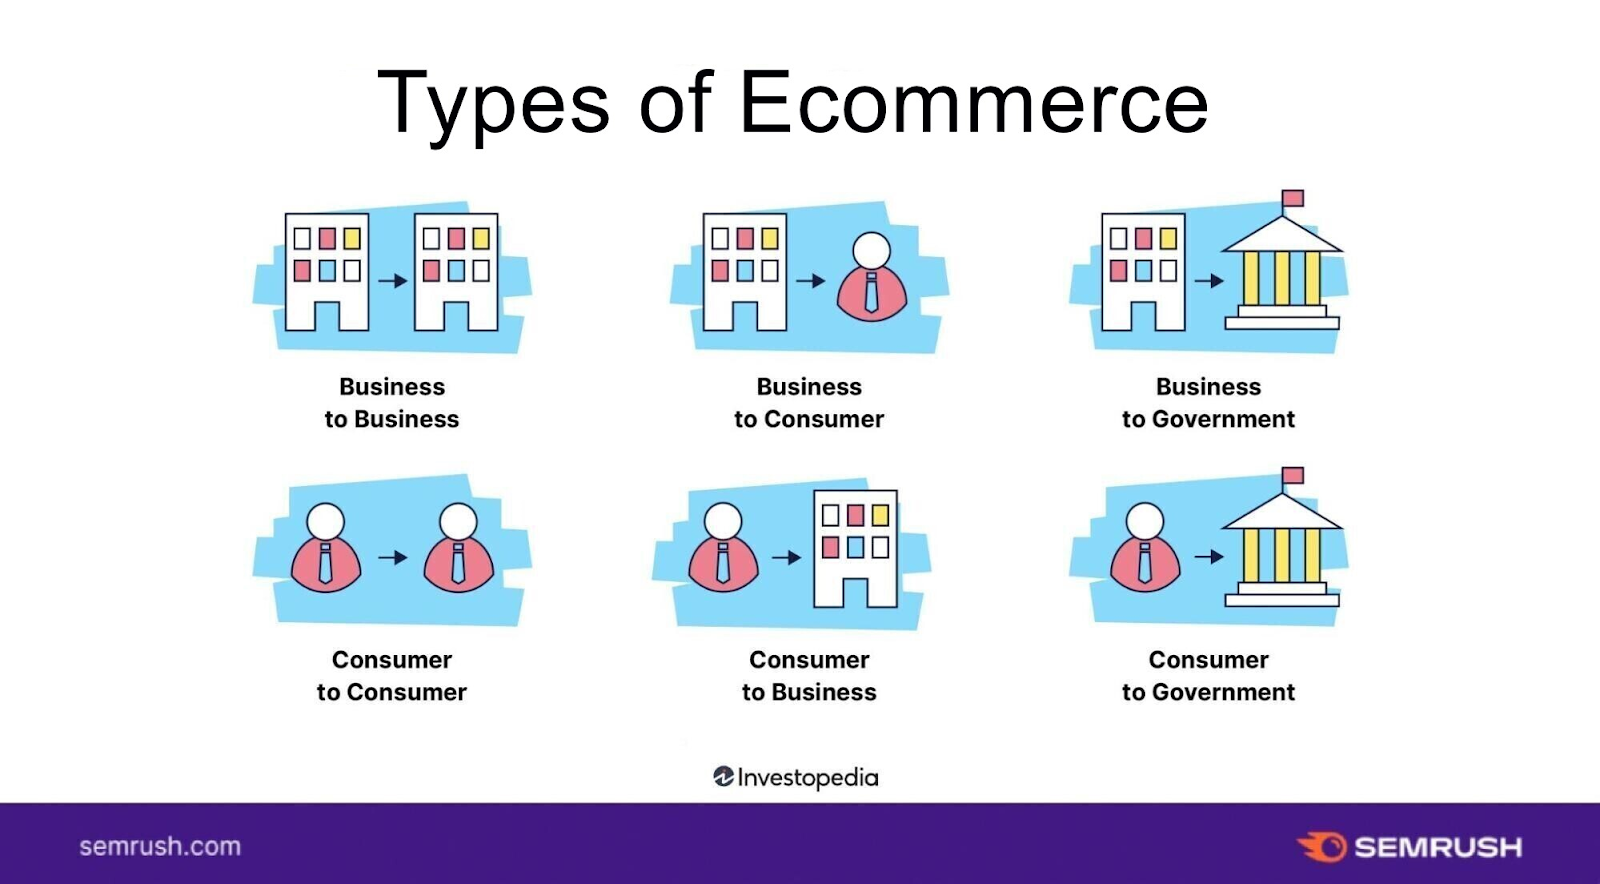 "Types of Ecommerce" infographic